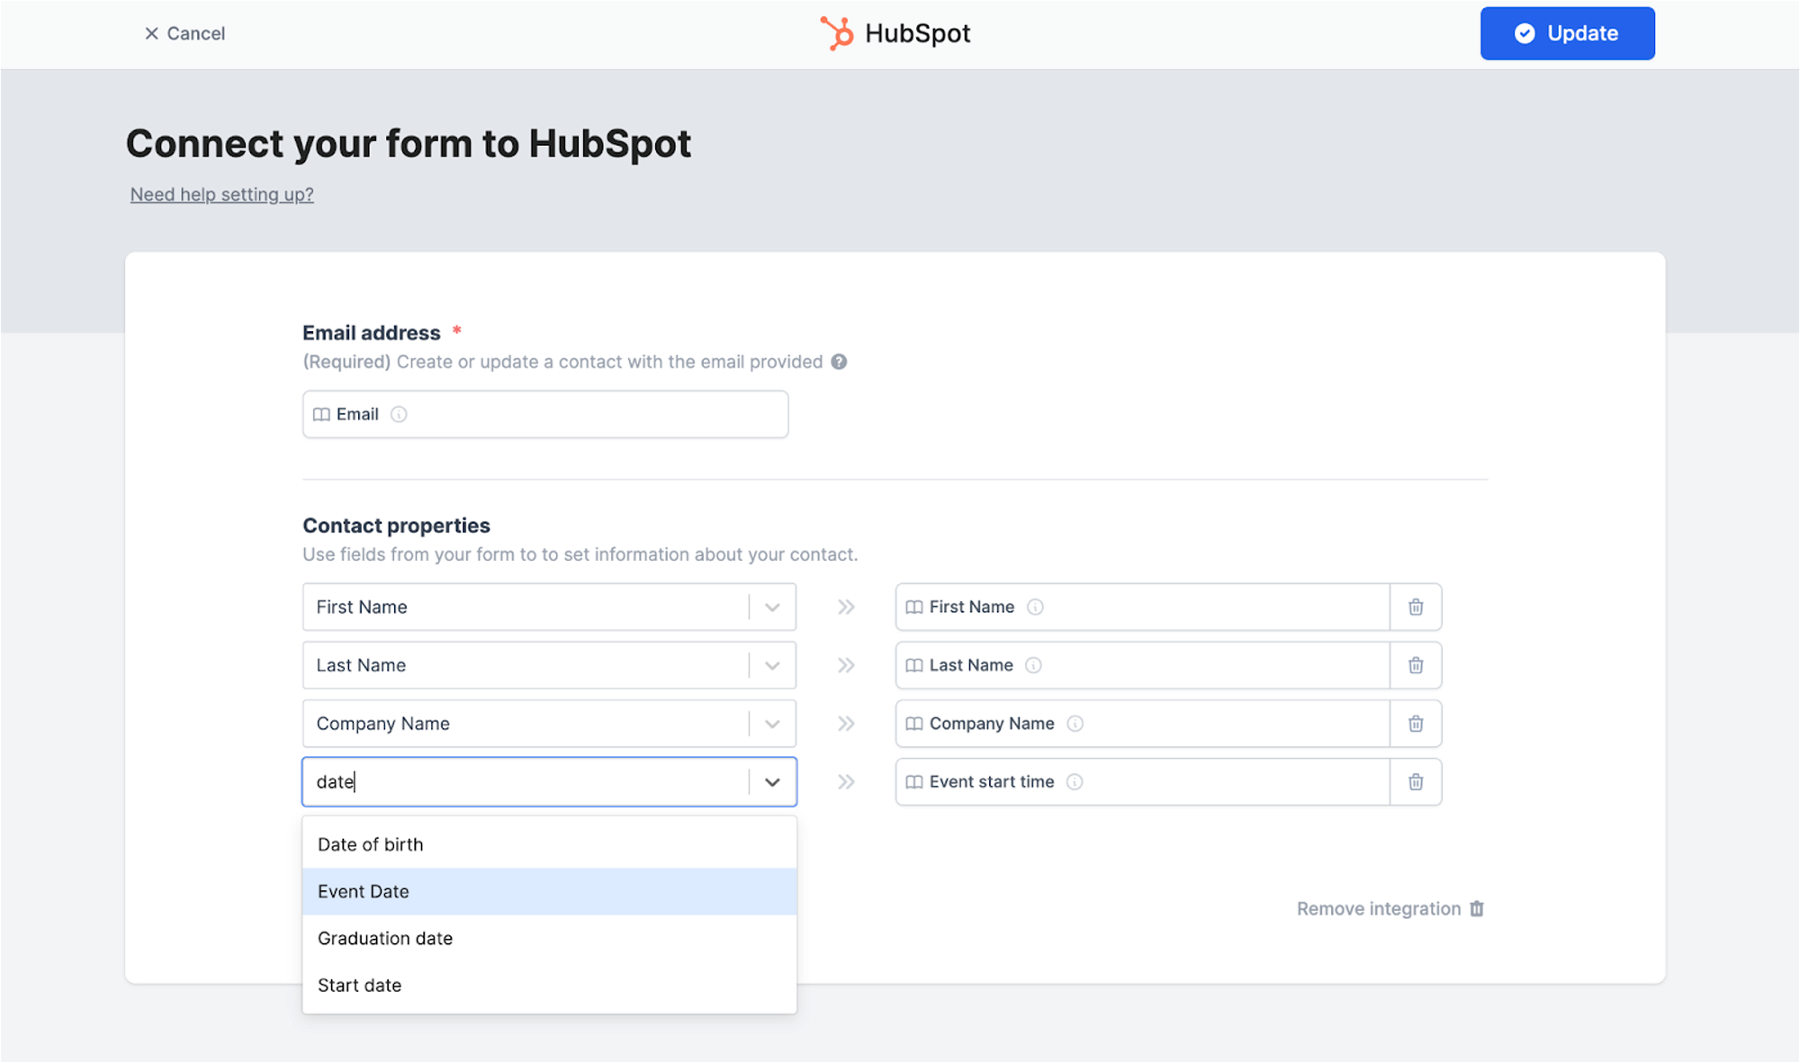 Link any field to HubSpot if needed